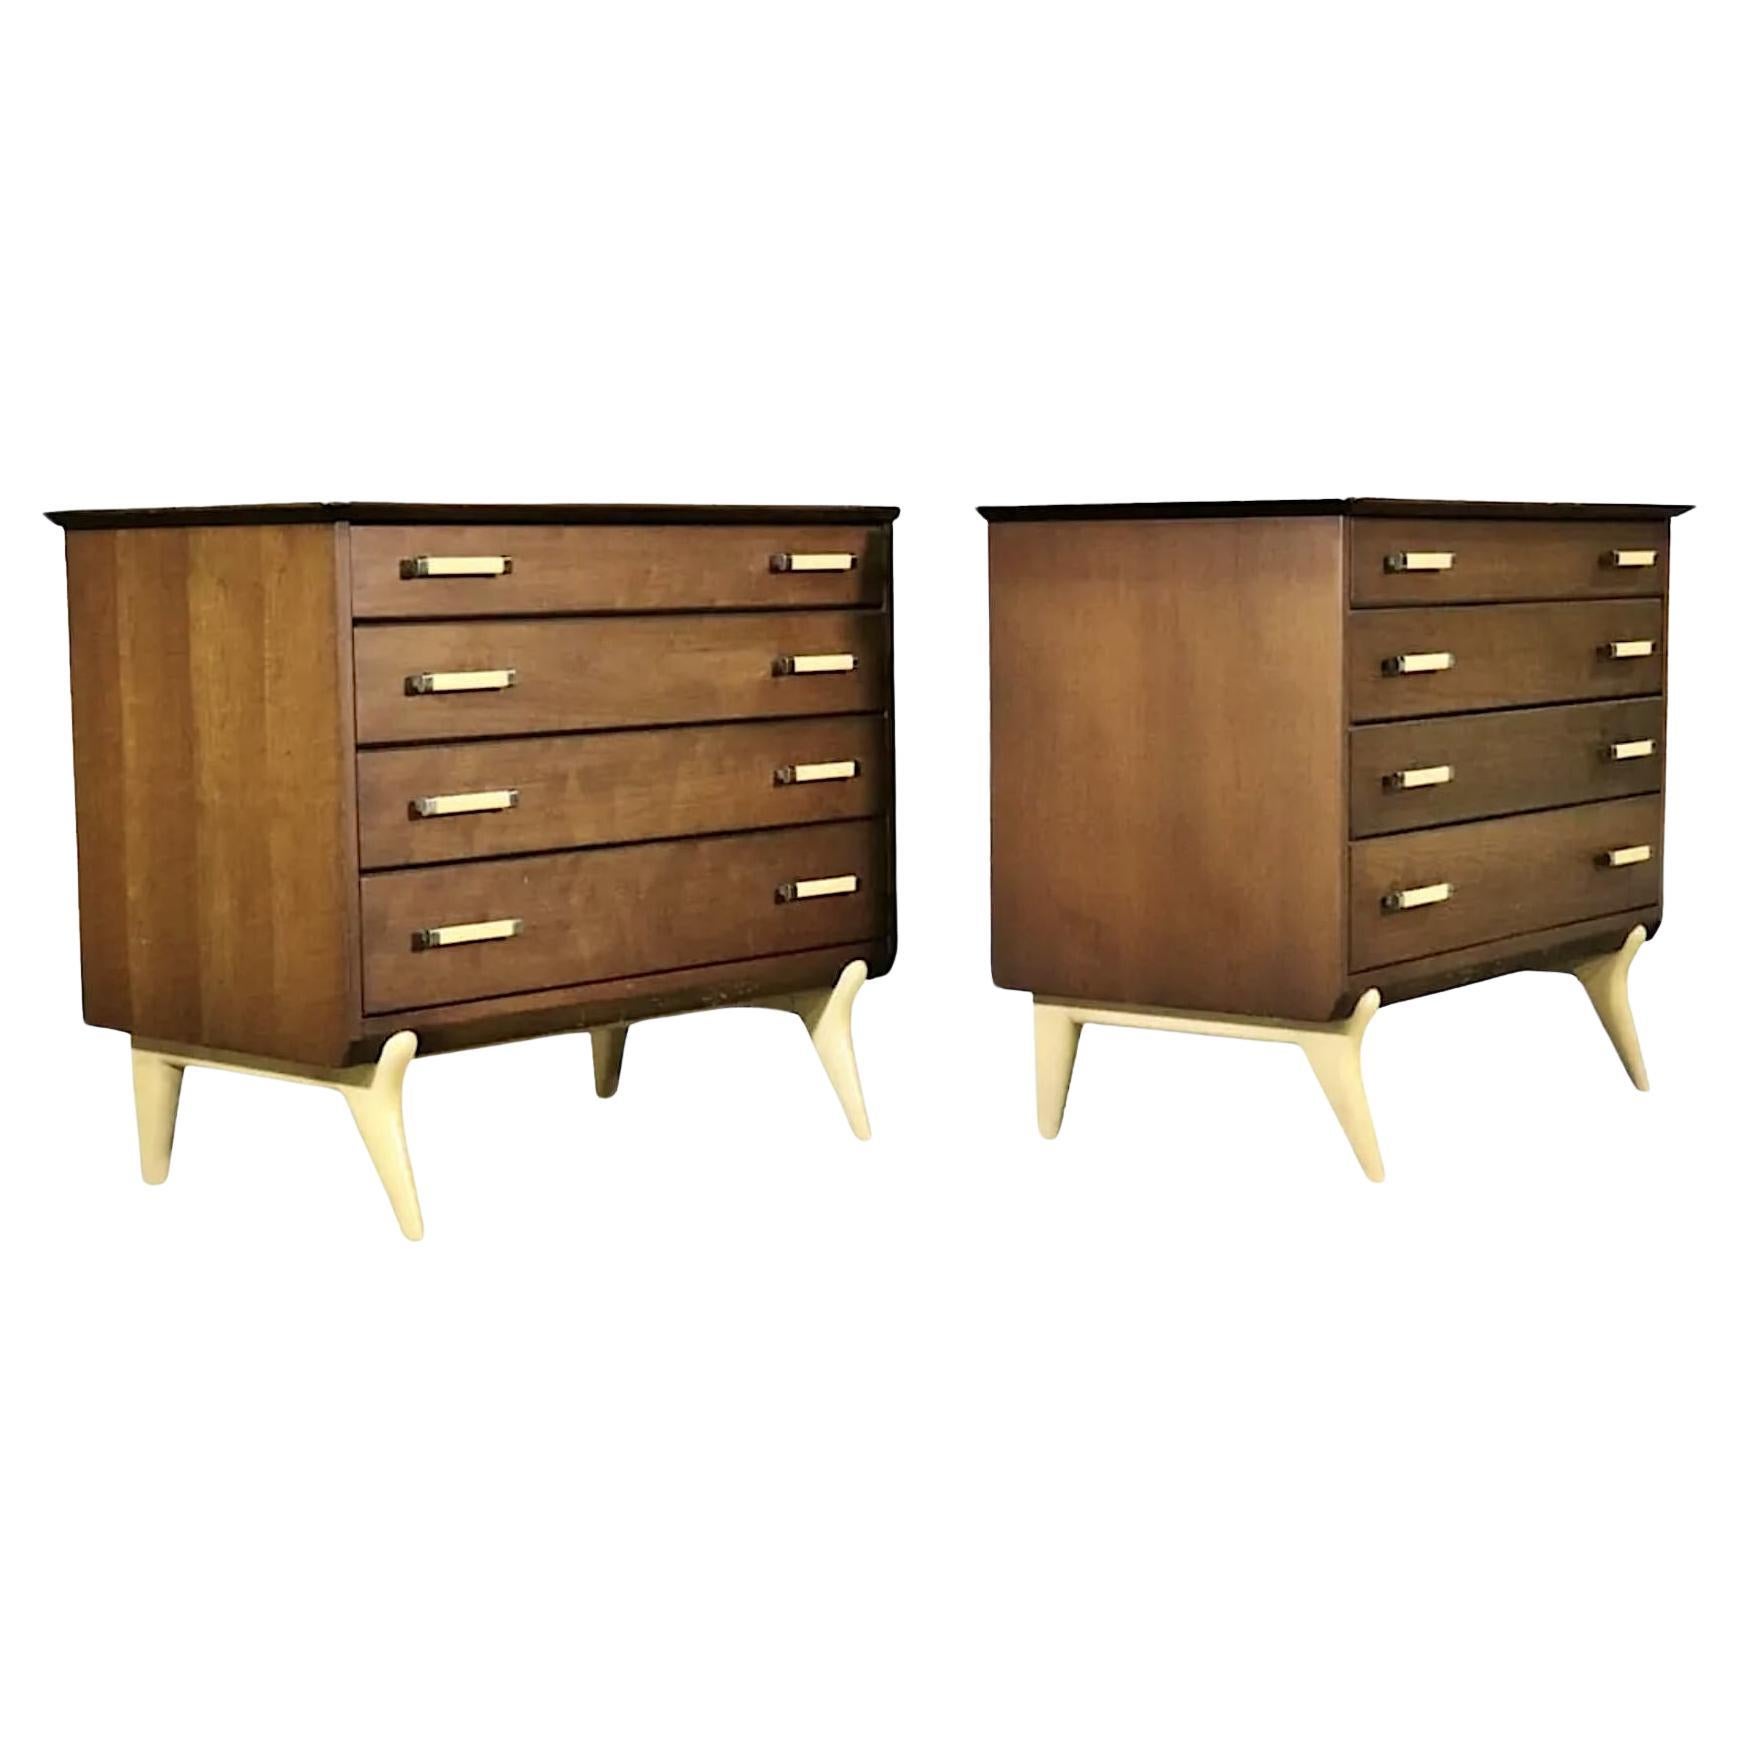 Renzo Rutili Commodes and Chests of Drawers